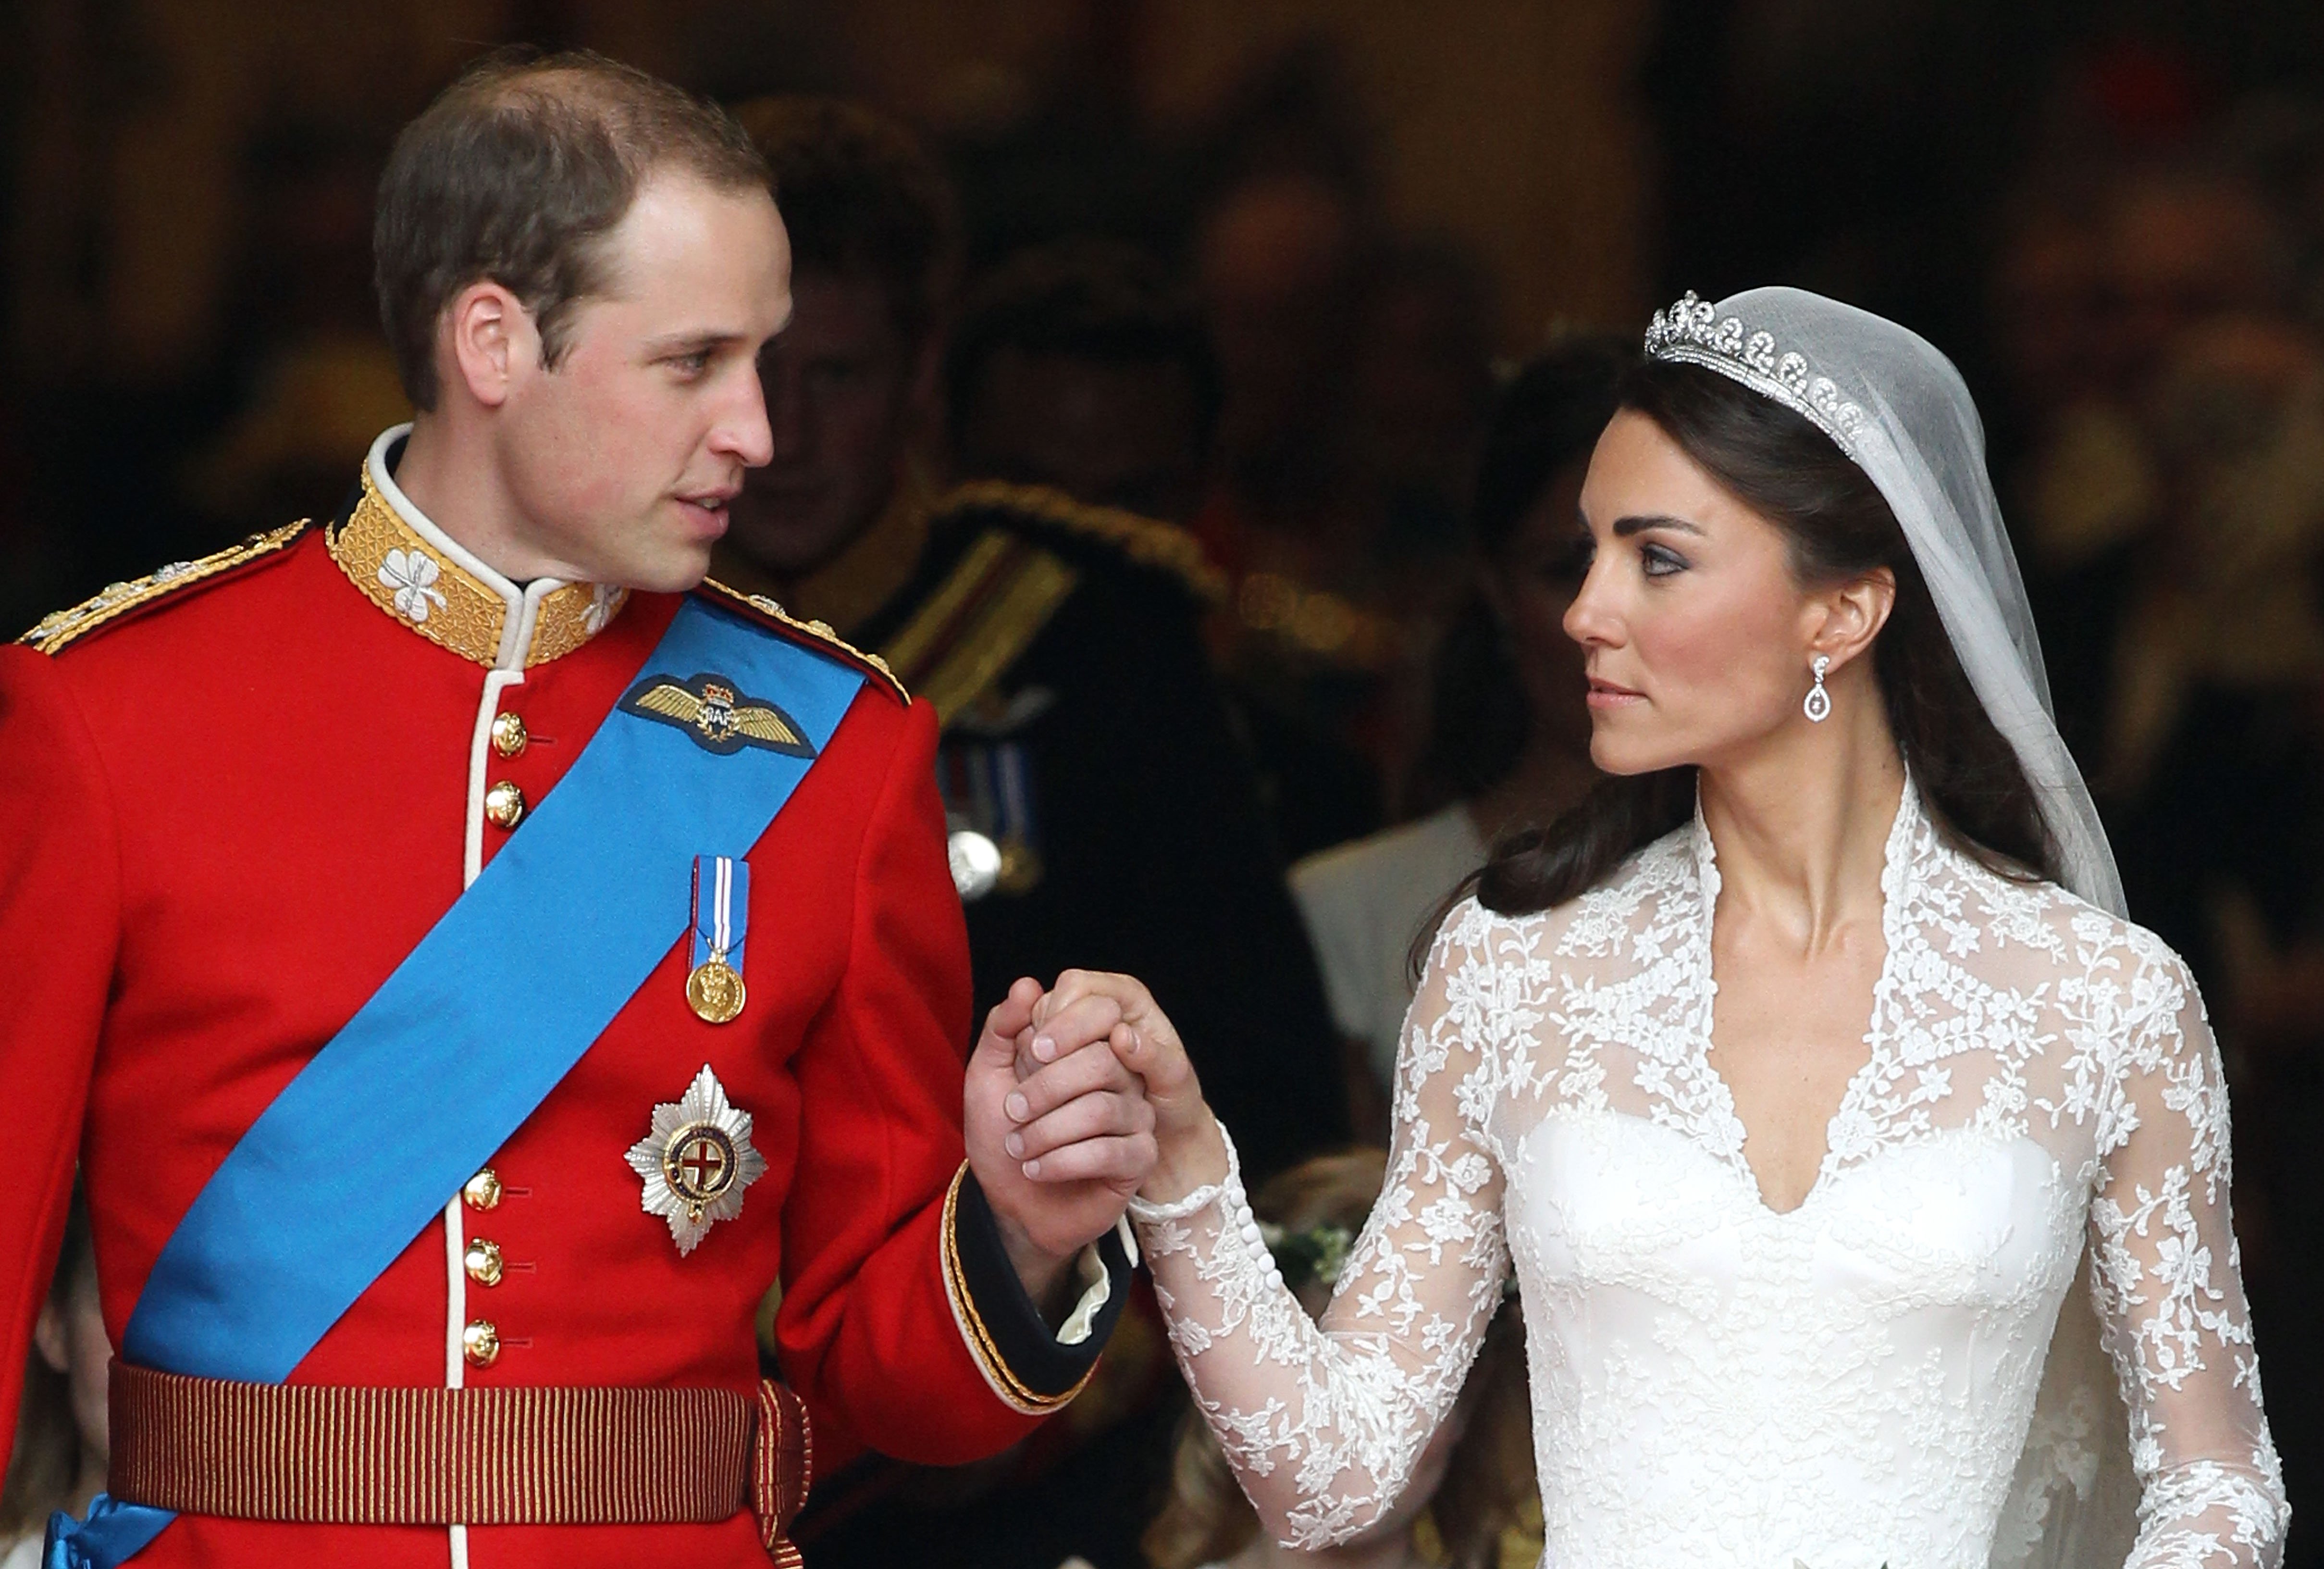 Prince William and Kate Middleton on their wedding day in London in 2011. | Source: Getty Images